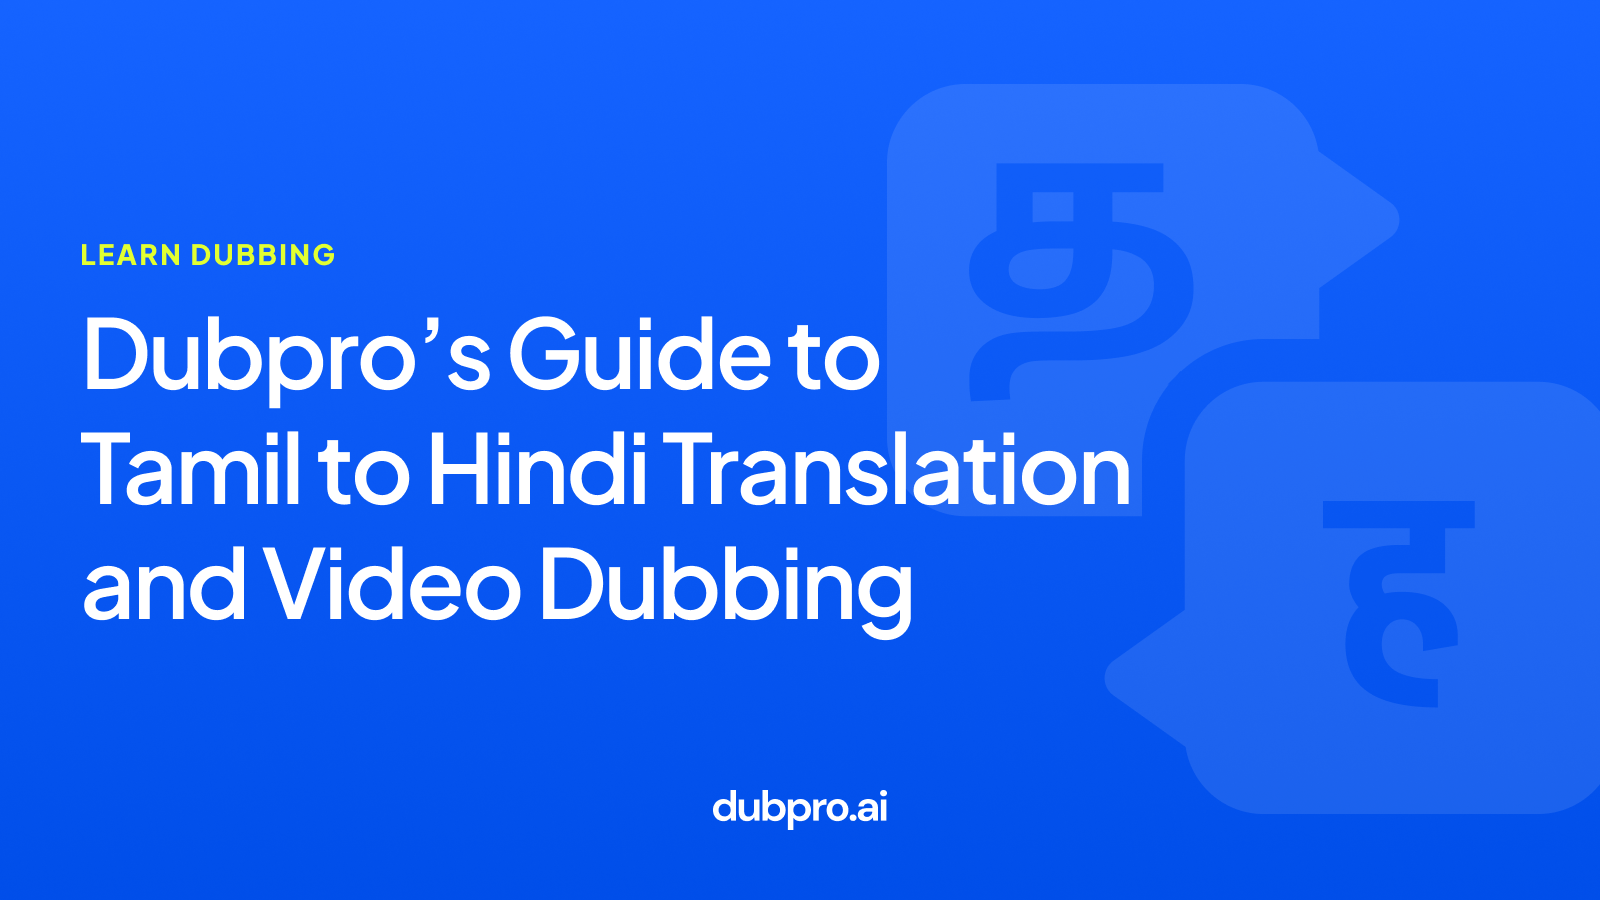 Dubpro’s Guide to Tamil to Hindi Translation and Video Dubbing